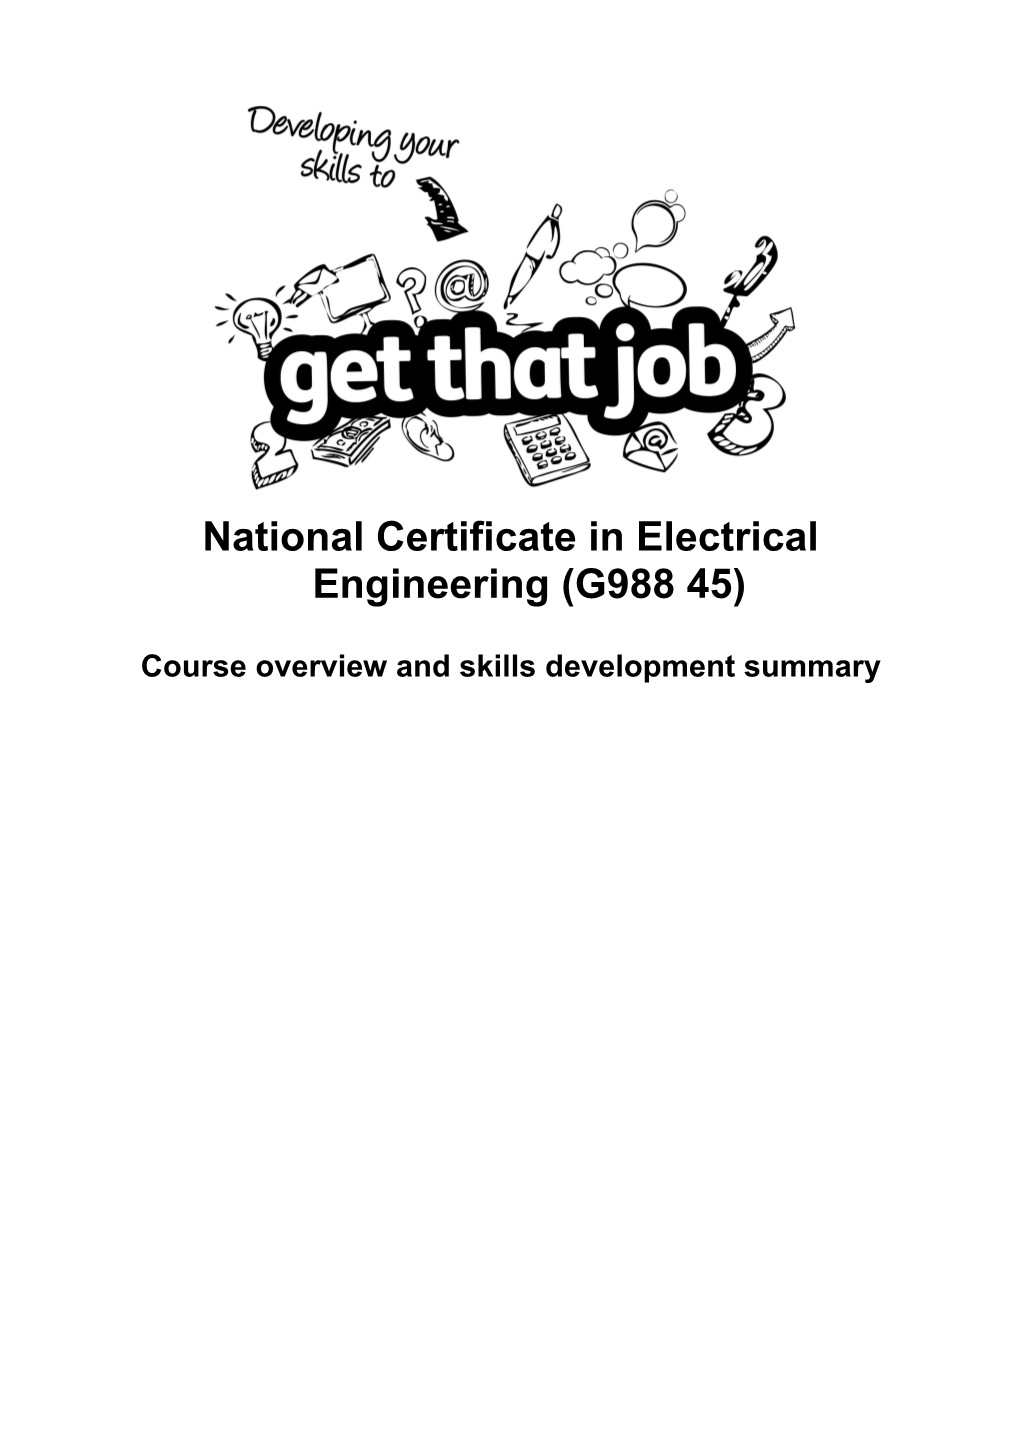 National Certificate in Electrical Engineering (G988 45)